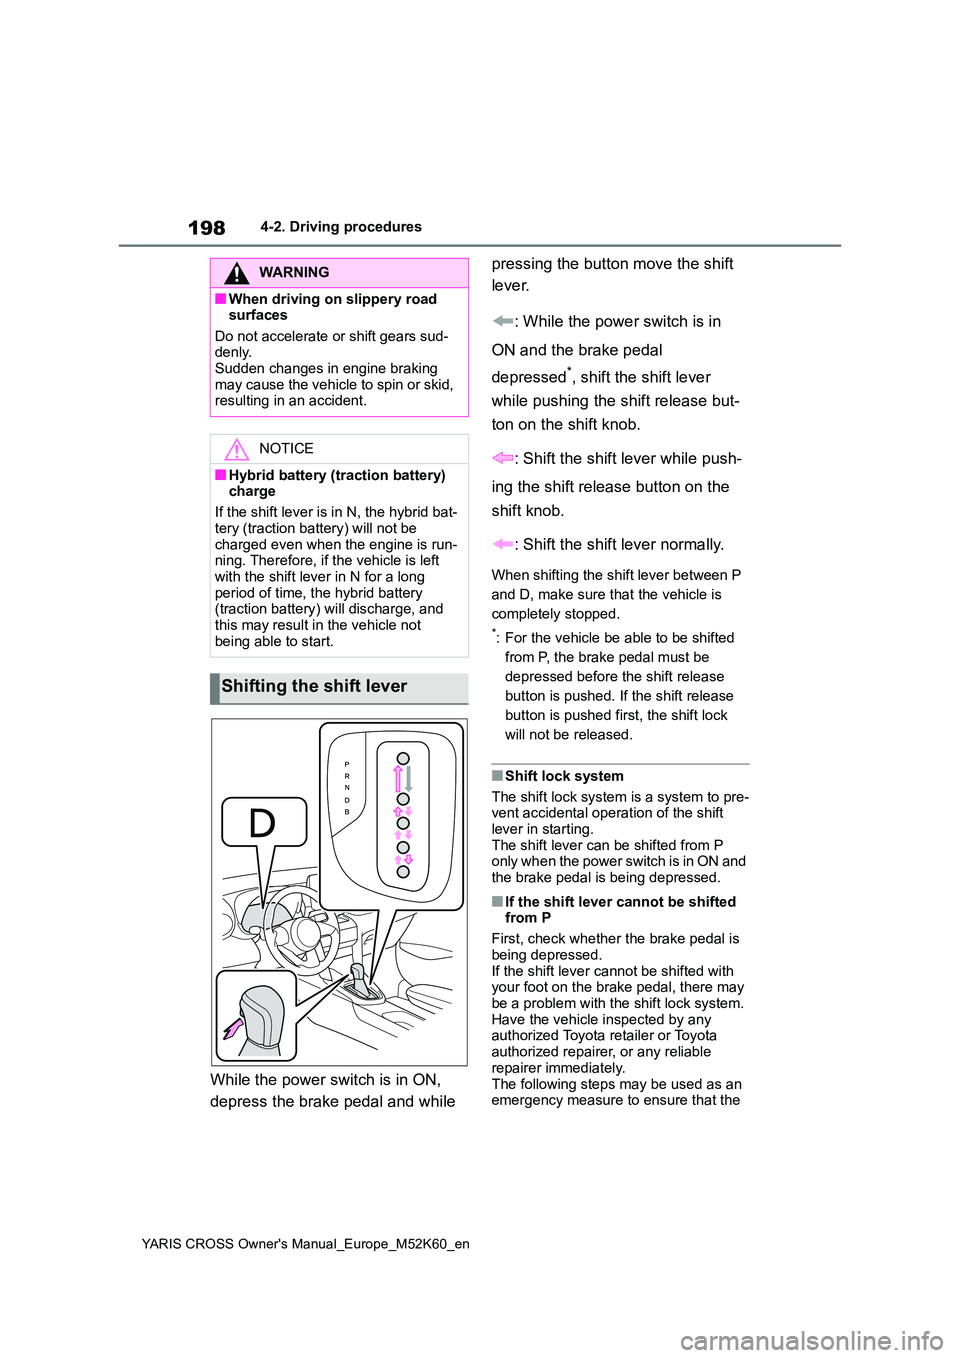 TOYOTA YARIS CROSS 2021  Owners Manual 198
YARIS CROSS Owner's Manual_Europe_M52K60_en
4-2. Driving procedures
While the power switch is in ON,  
depress the brake pedal and while  
pressing the button move the shift  
lever. 
: While 